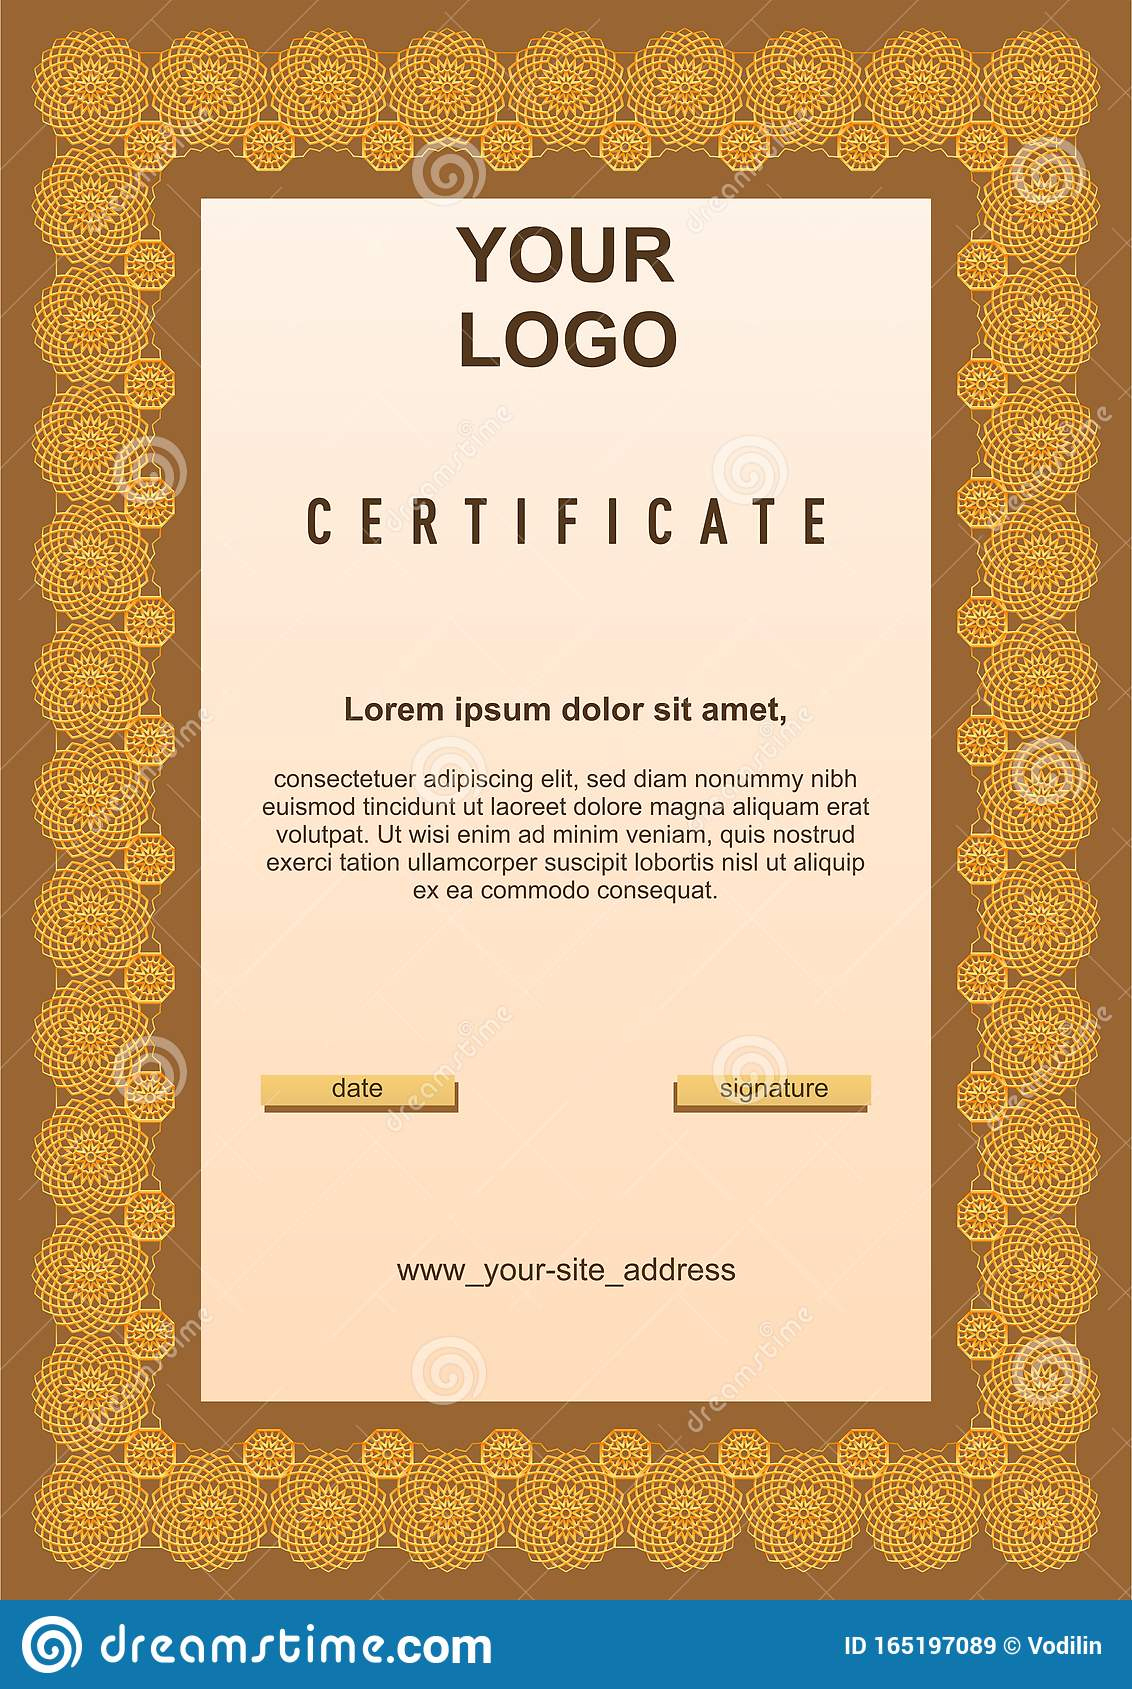 Diploma/Certificate Template With Floral/Geometric Spiral Golden pertaining to Simple Certificate Template Size